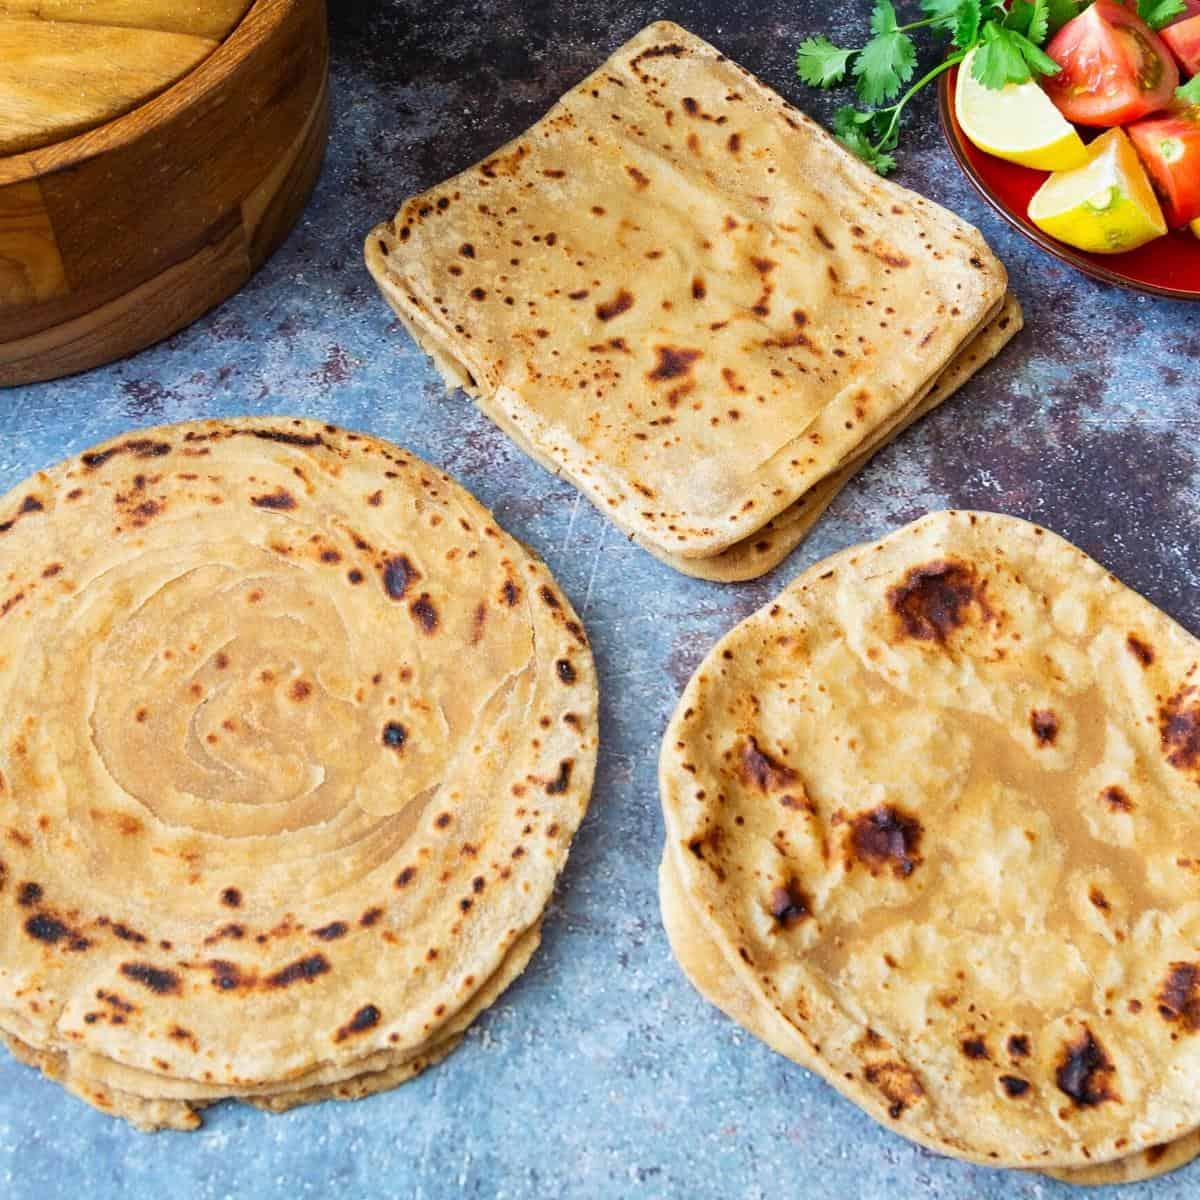 Indian flatbreads on a wooden board.